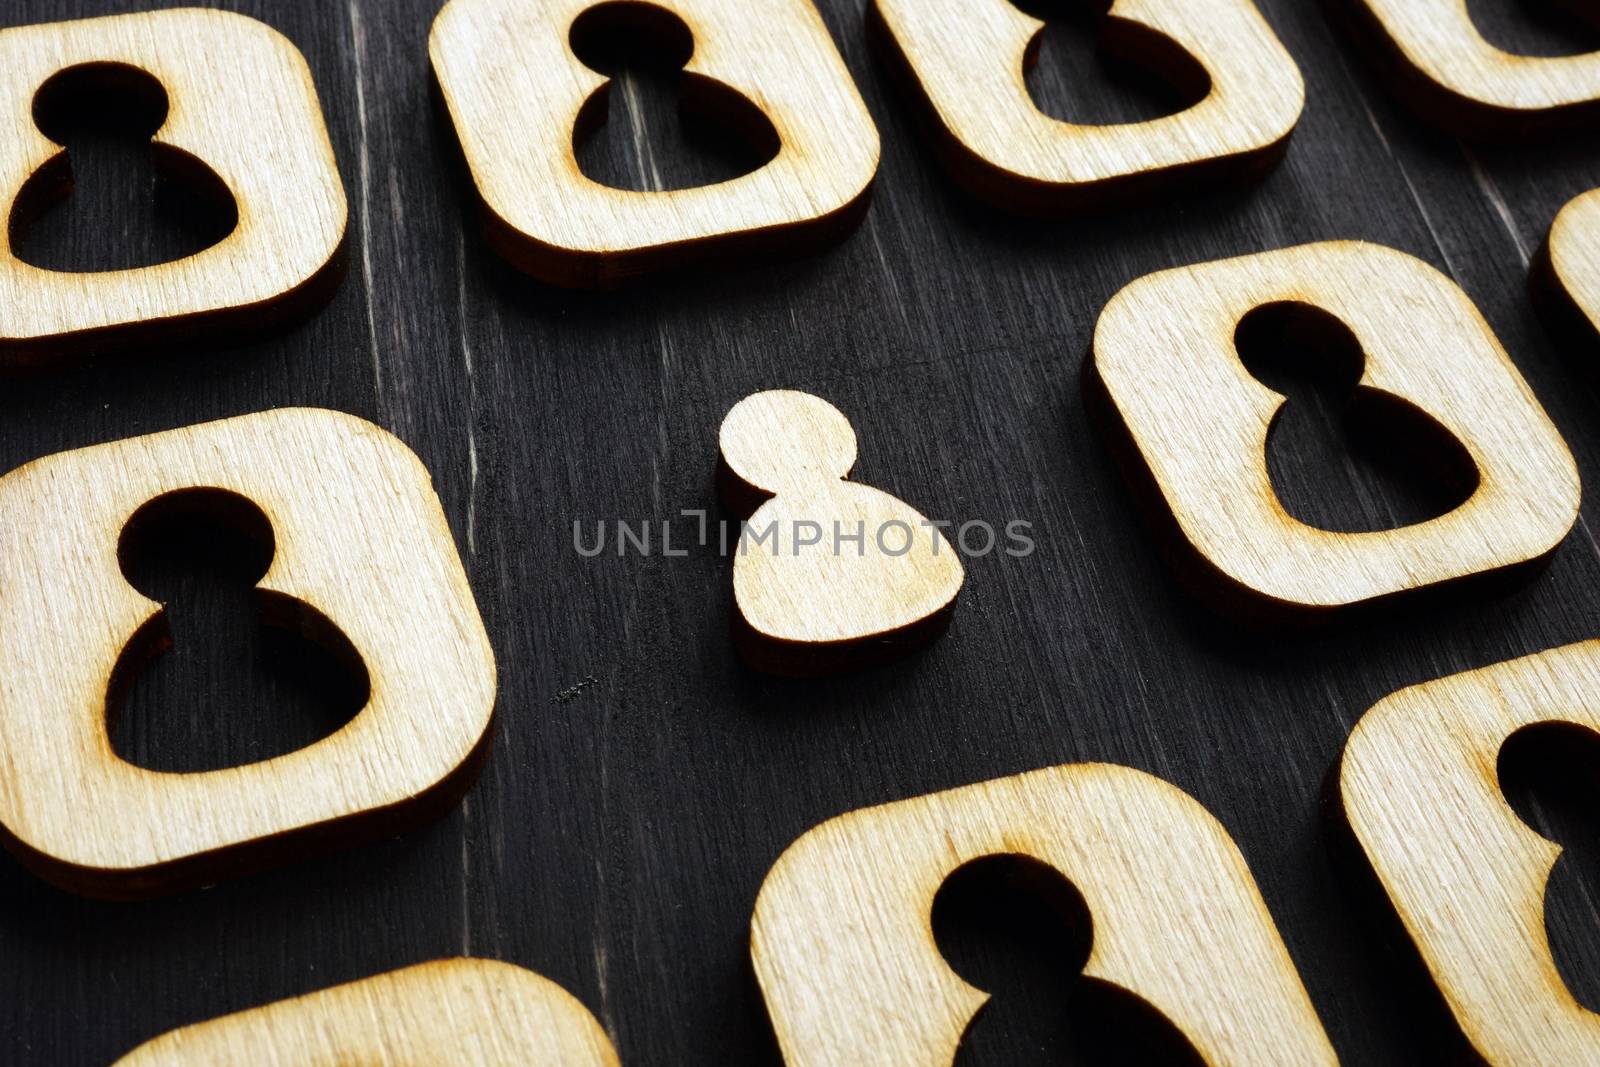 Unique stand out of the crowd. Wooden figures on the dark surface. by designer491